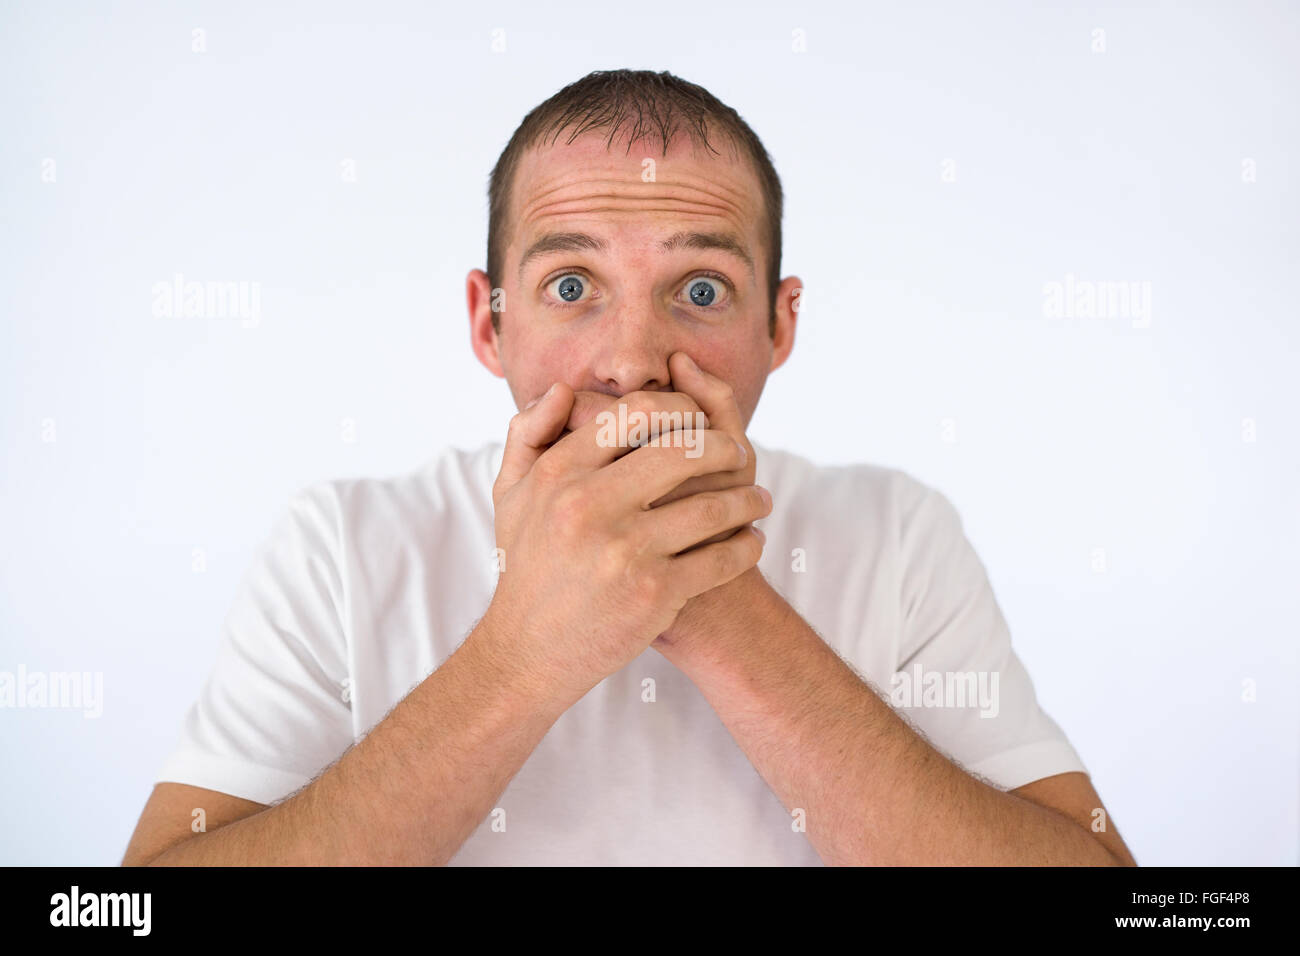 Man with his hands covering his mouth looking shocked Stock Photo